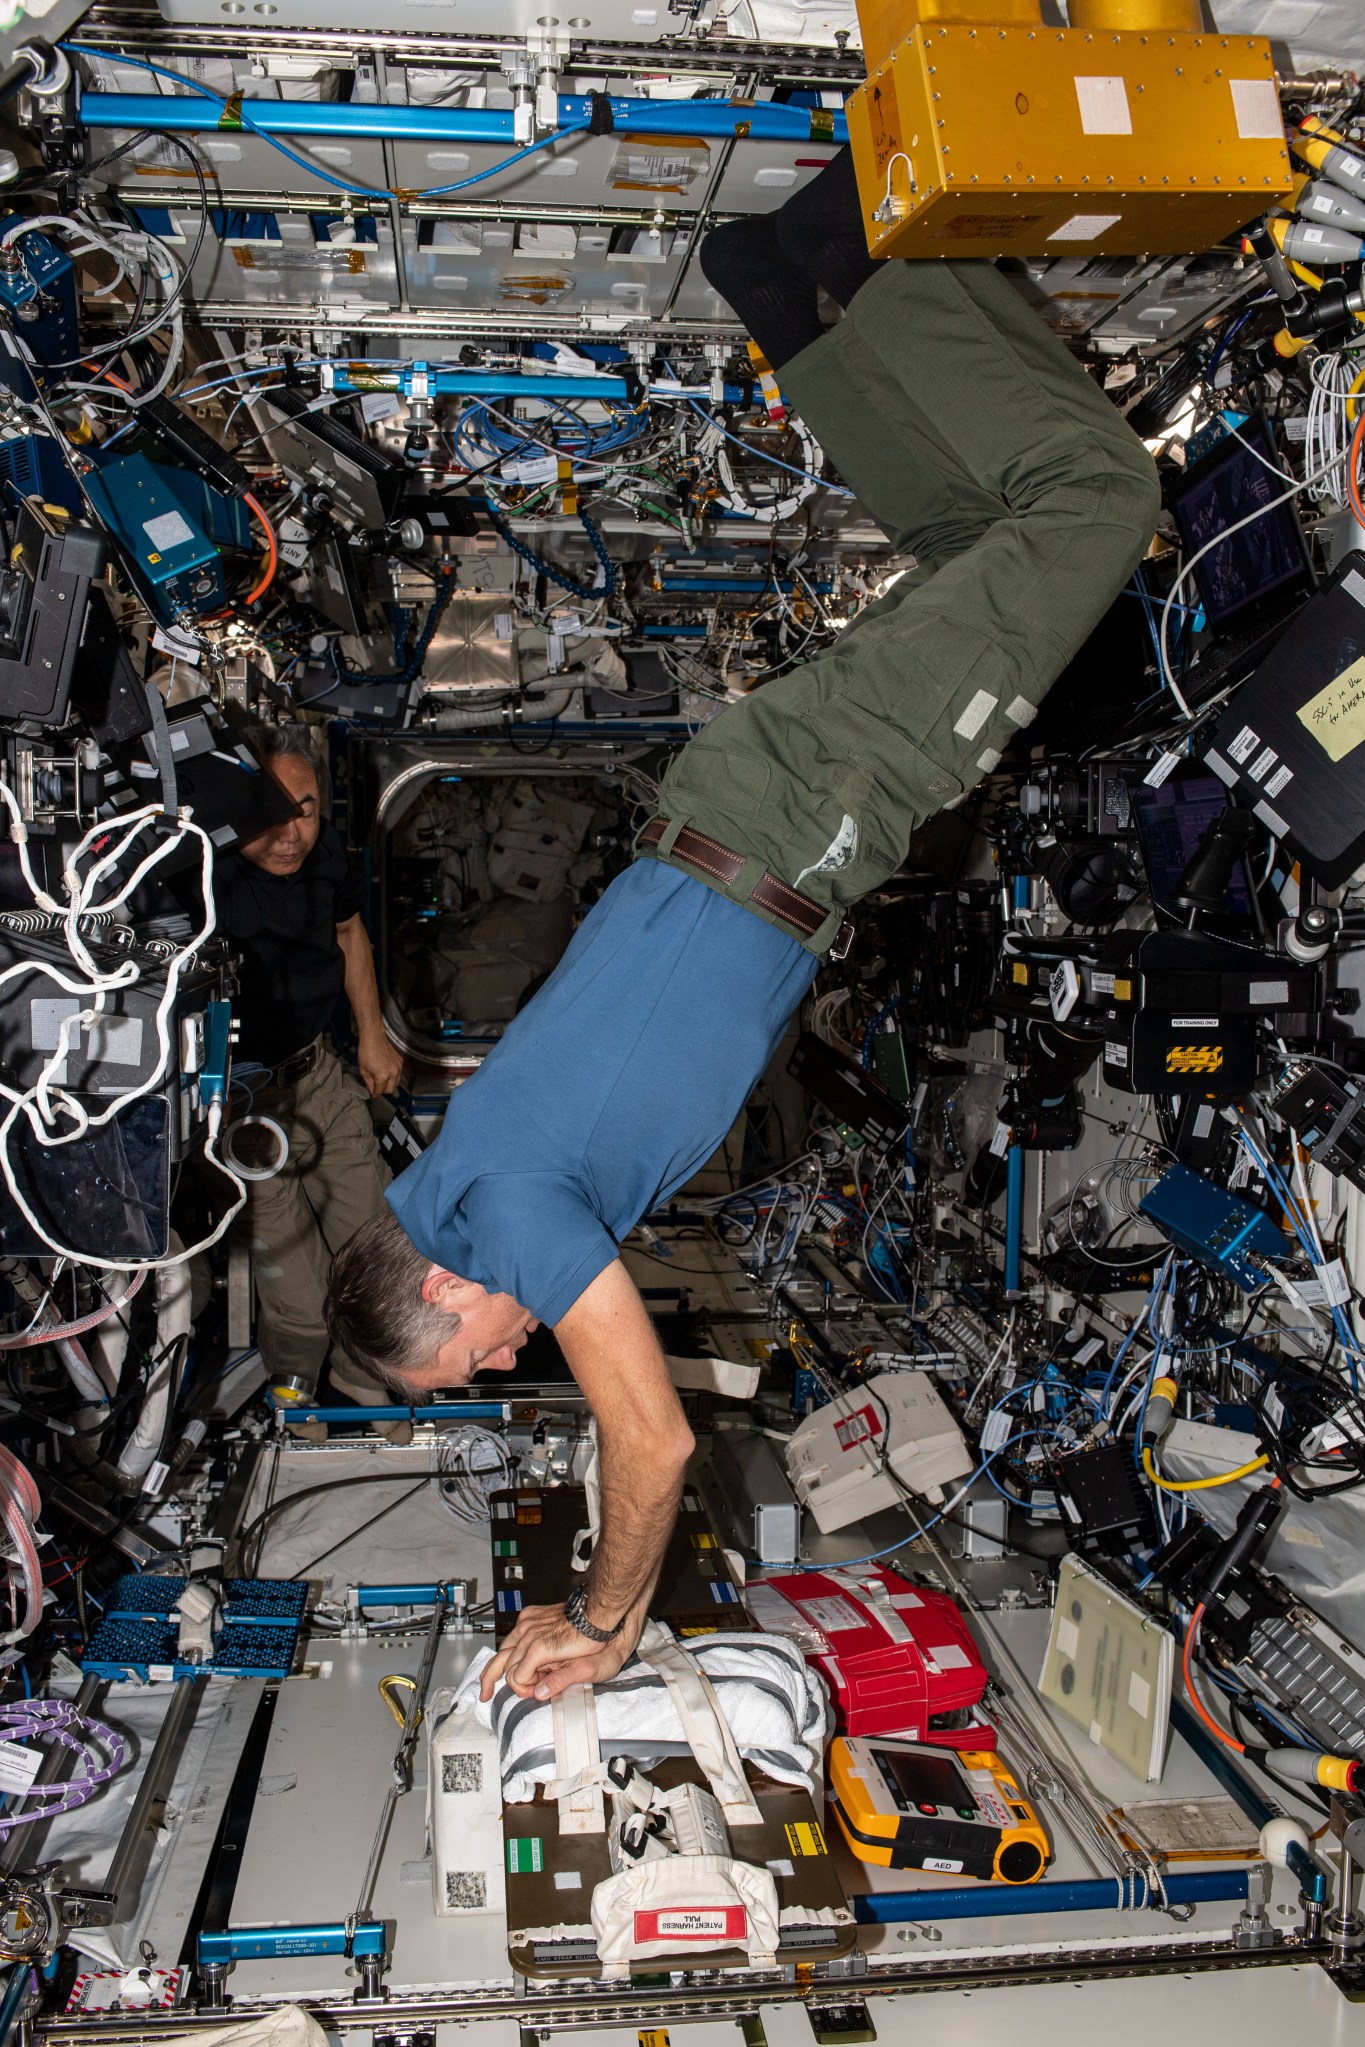 Expedition 70 Commander Andreas Mogensen of ESA (European Space Agency) stabilizes himself in the microgravity environment and practices chest compressions, or cardiopulmonary resuscitation (CPR), inside the International Space Station's Destiny laboratory module. In back, Flight Engineer Satoshi Furukawa of JAXA (Japan Aerospace Exploration Agency) observes the regularly scheduled emergency training session.